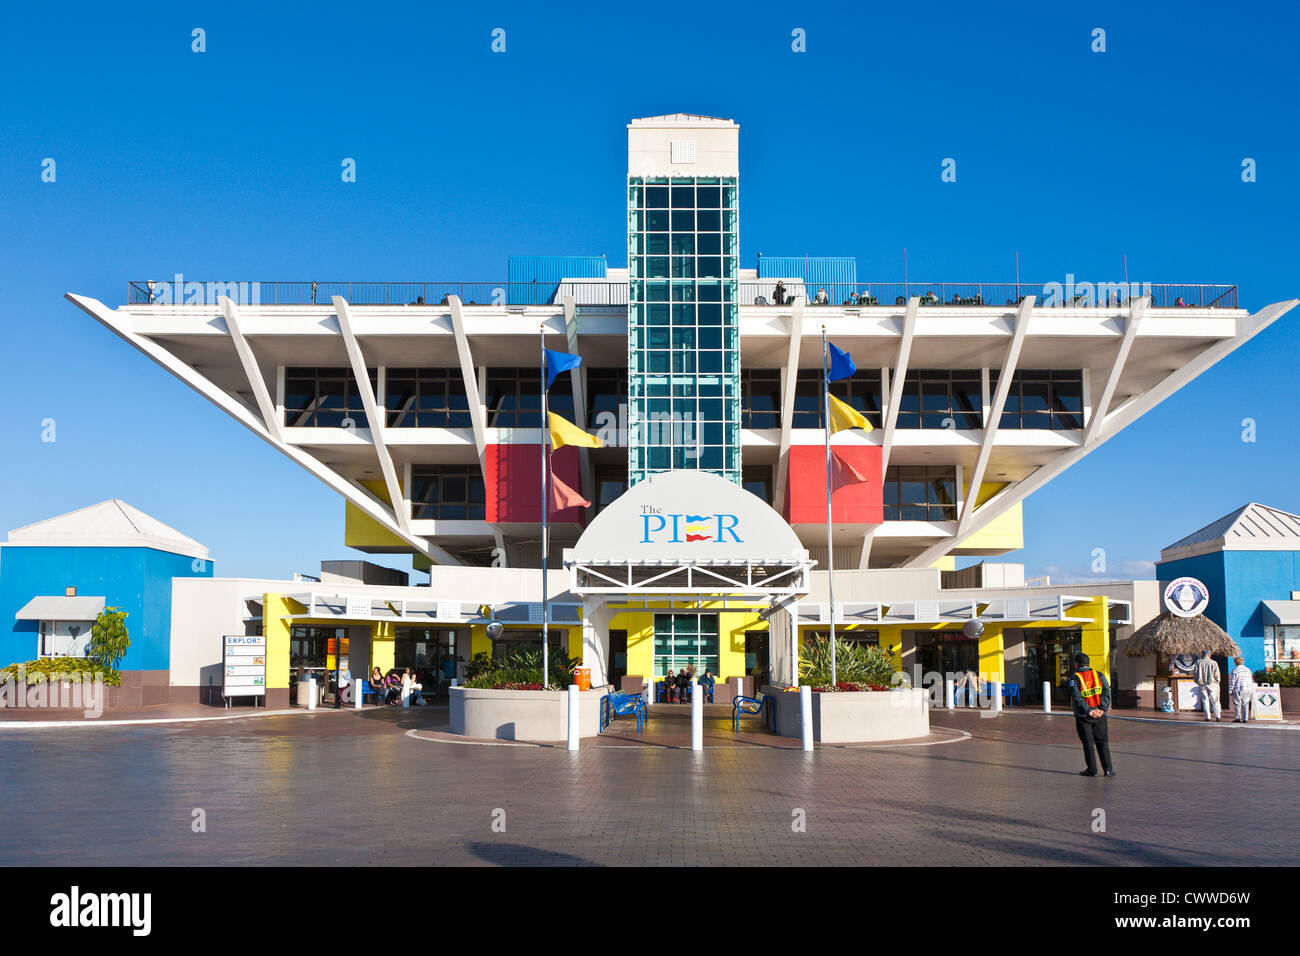 The St. Petersburg Pier contains an aquarium, shops and restaurants in  downtown St. Petersburg, FL Stock Photo - Alamy